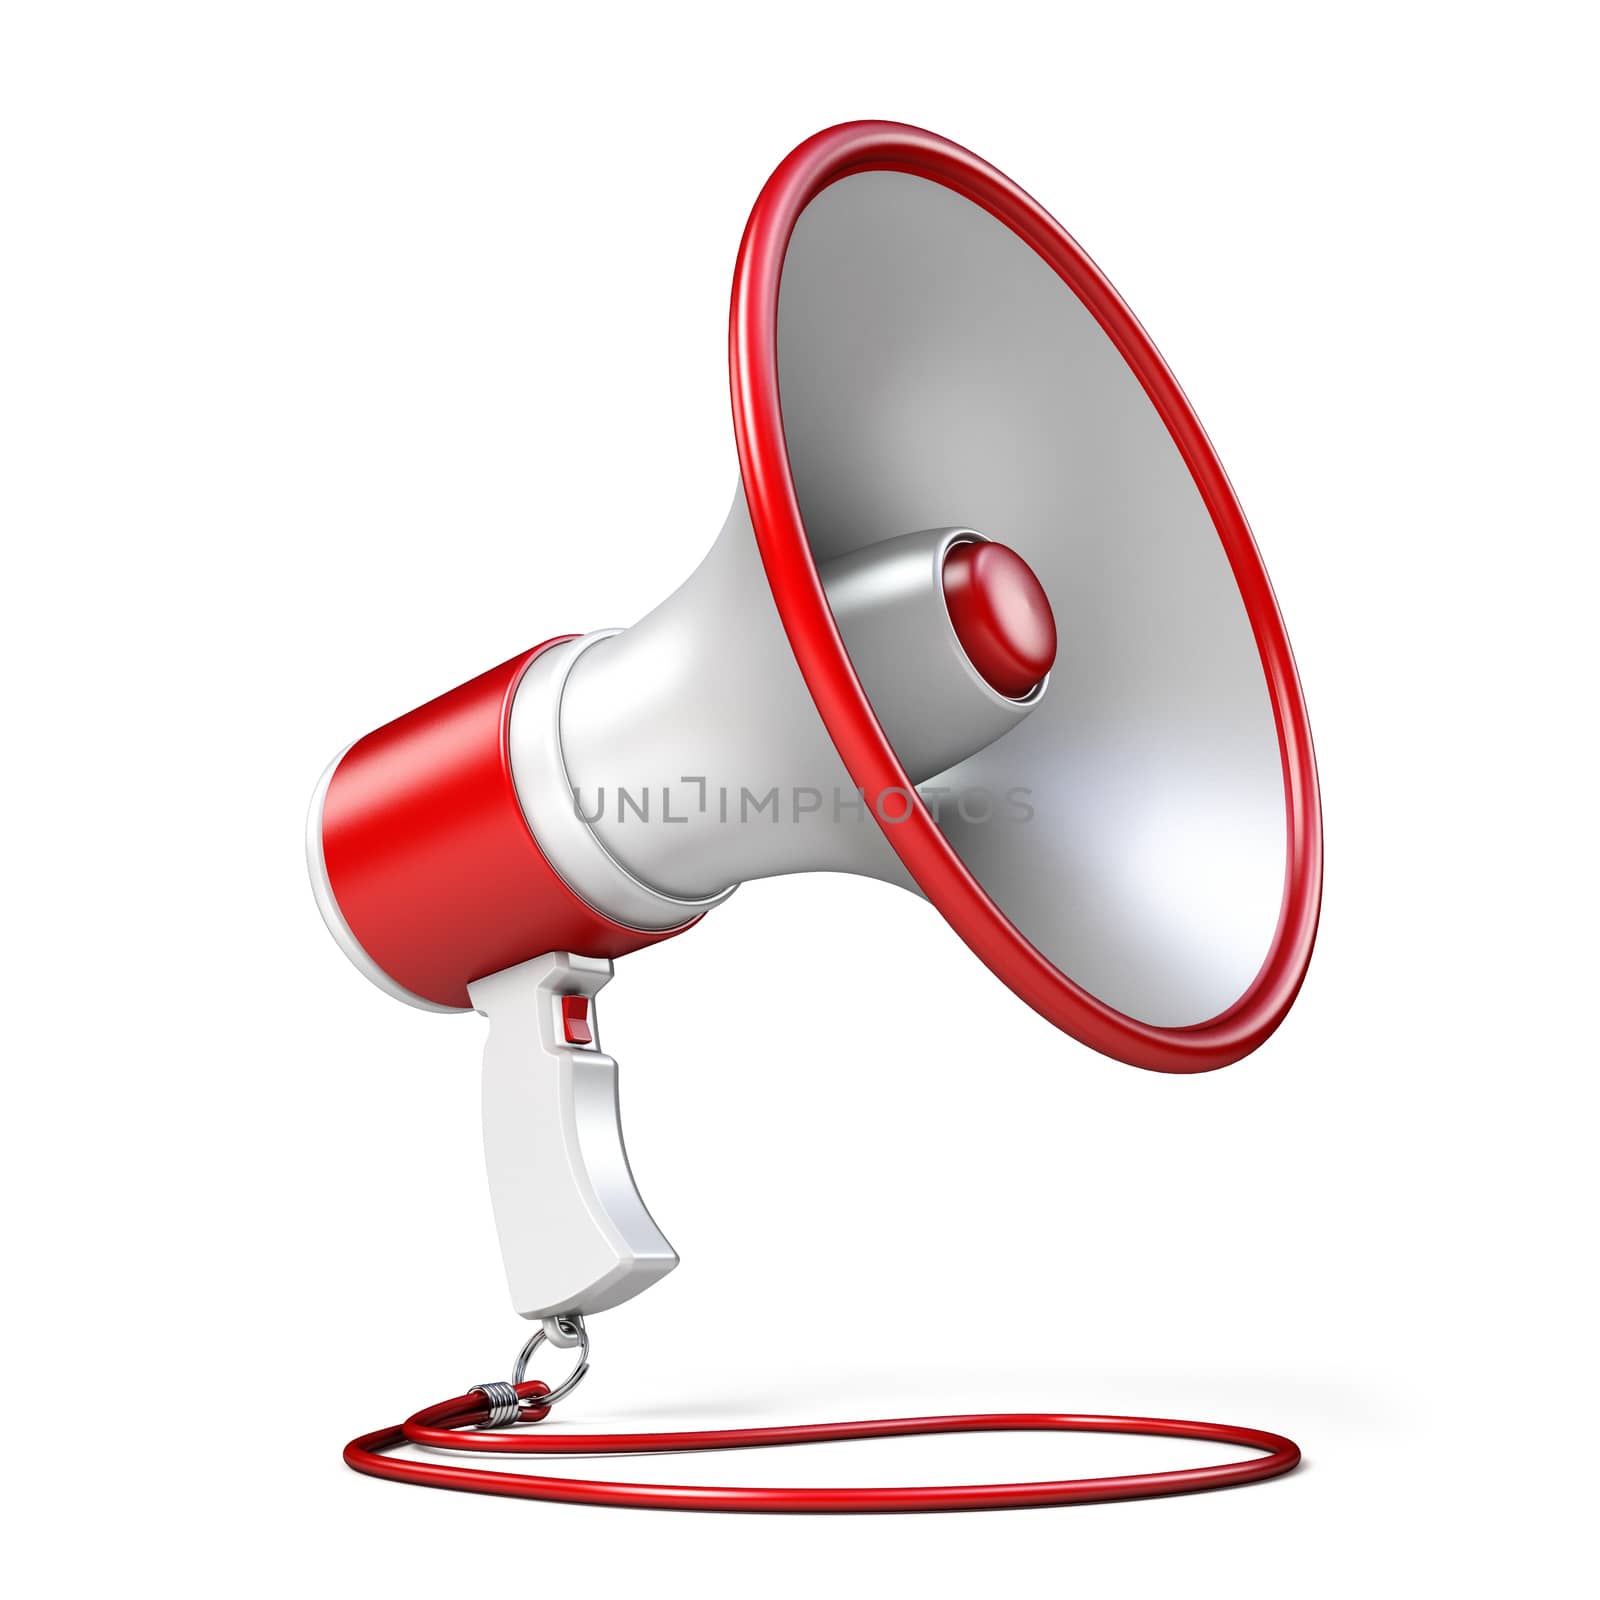 Red and white megaphone 3D by djmilic